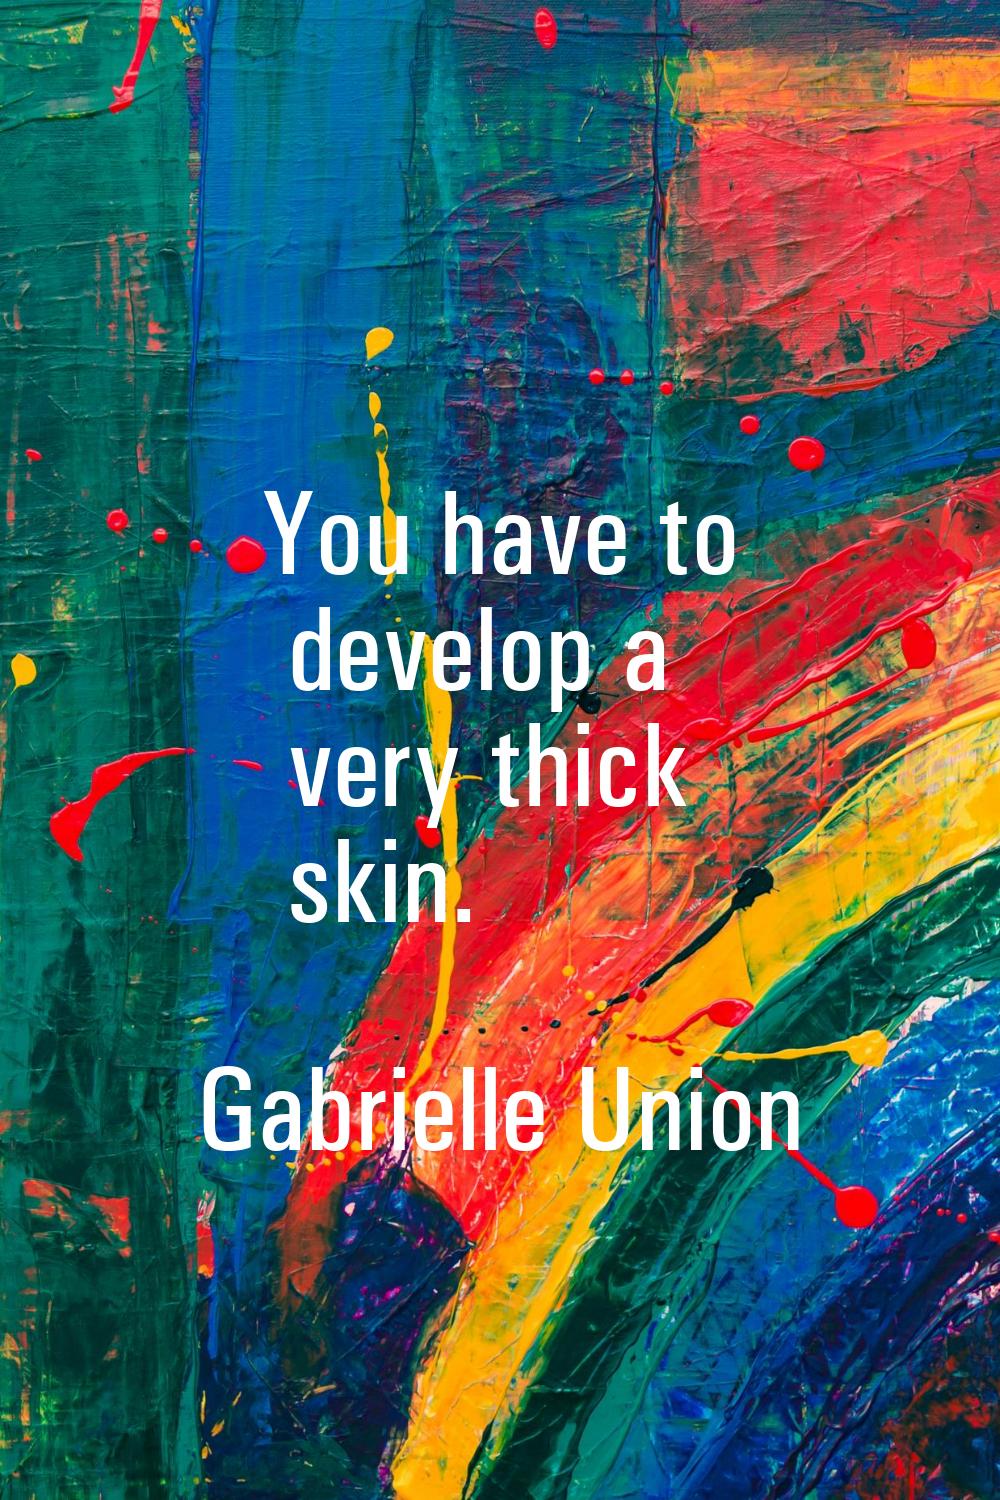 You have to develop a very thick skin.